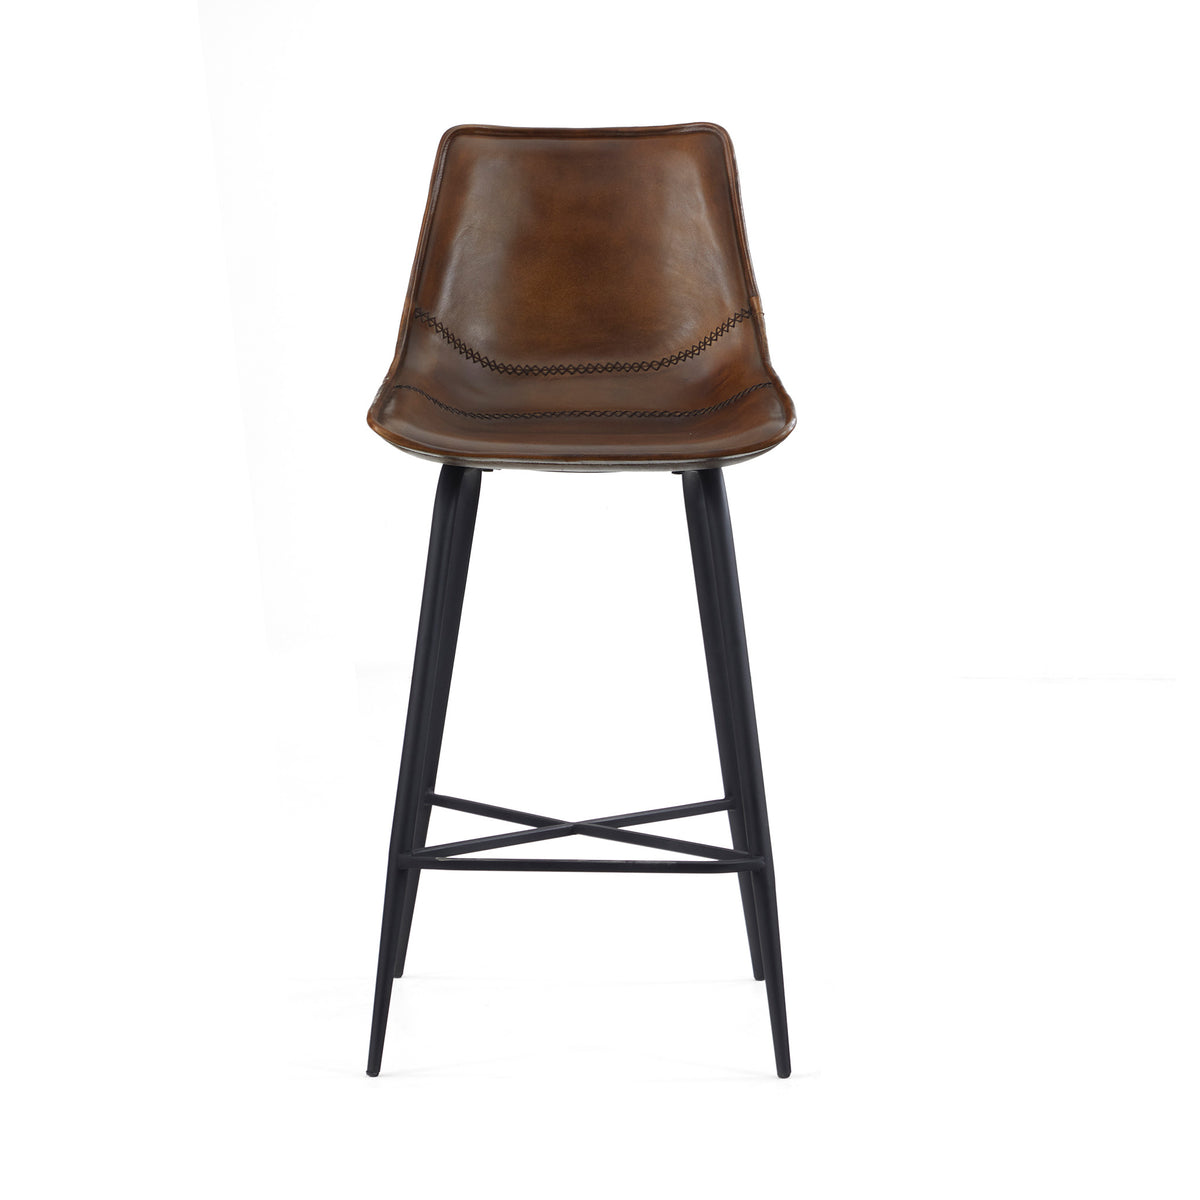 Laka Brown Leather Kitchen Breakfast Bar Stool front view